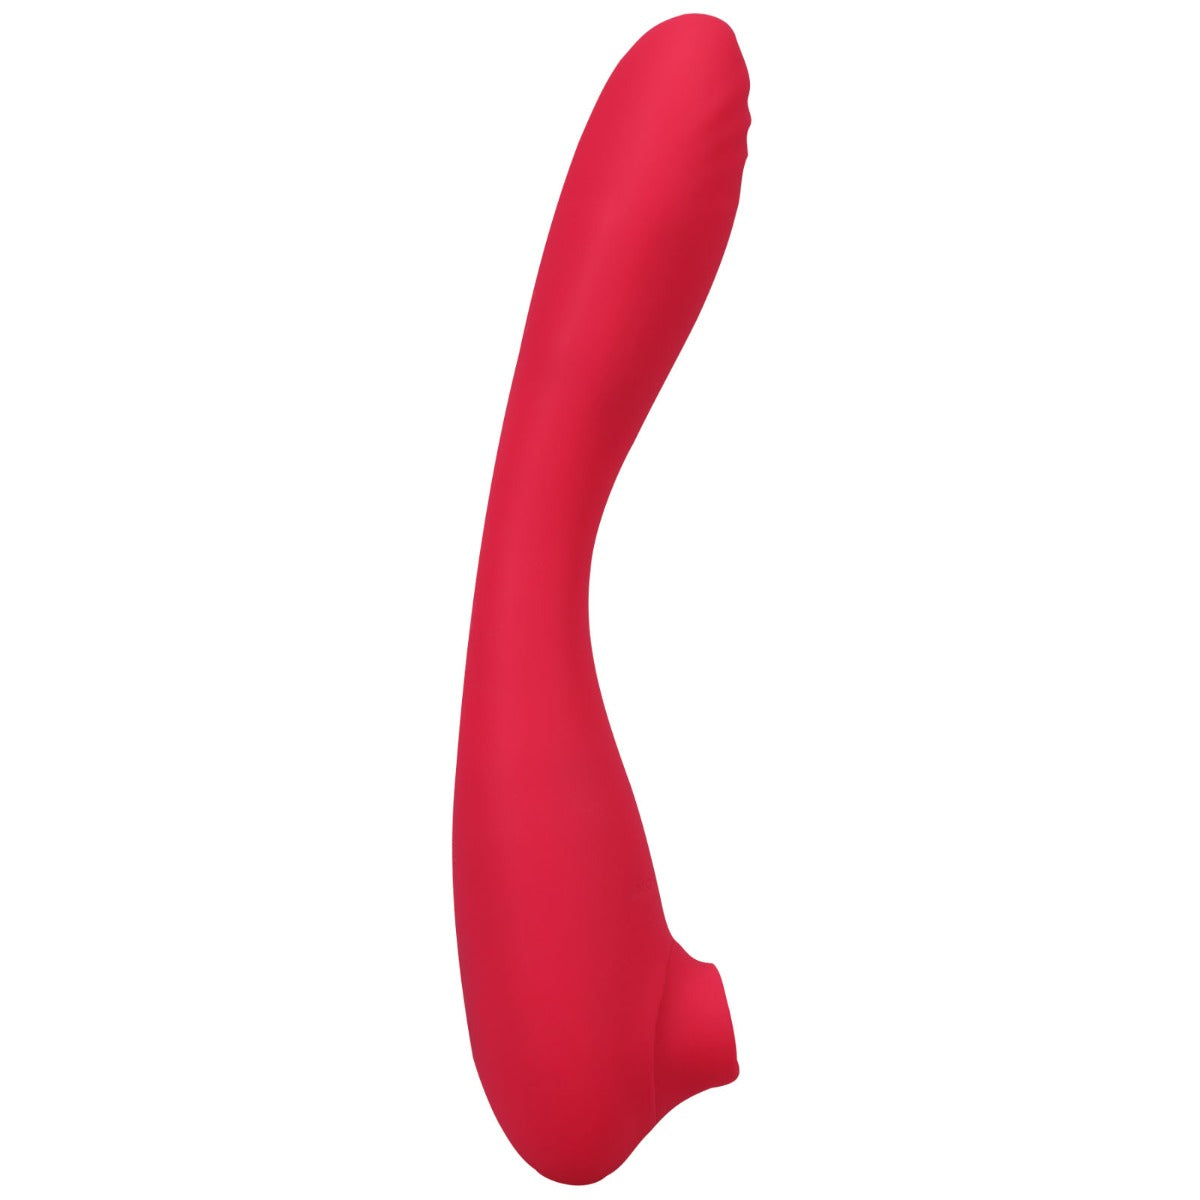 This Product Sucks | Bendable Wand From Doc Johnson - Pink/Red